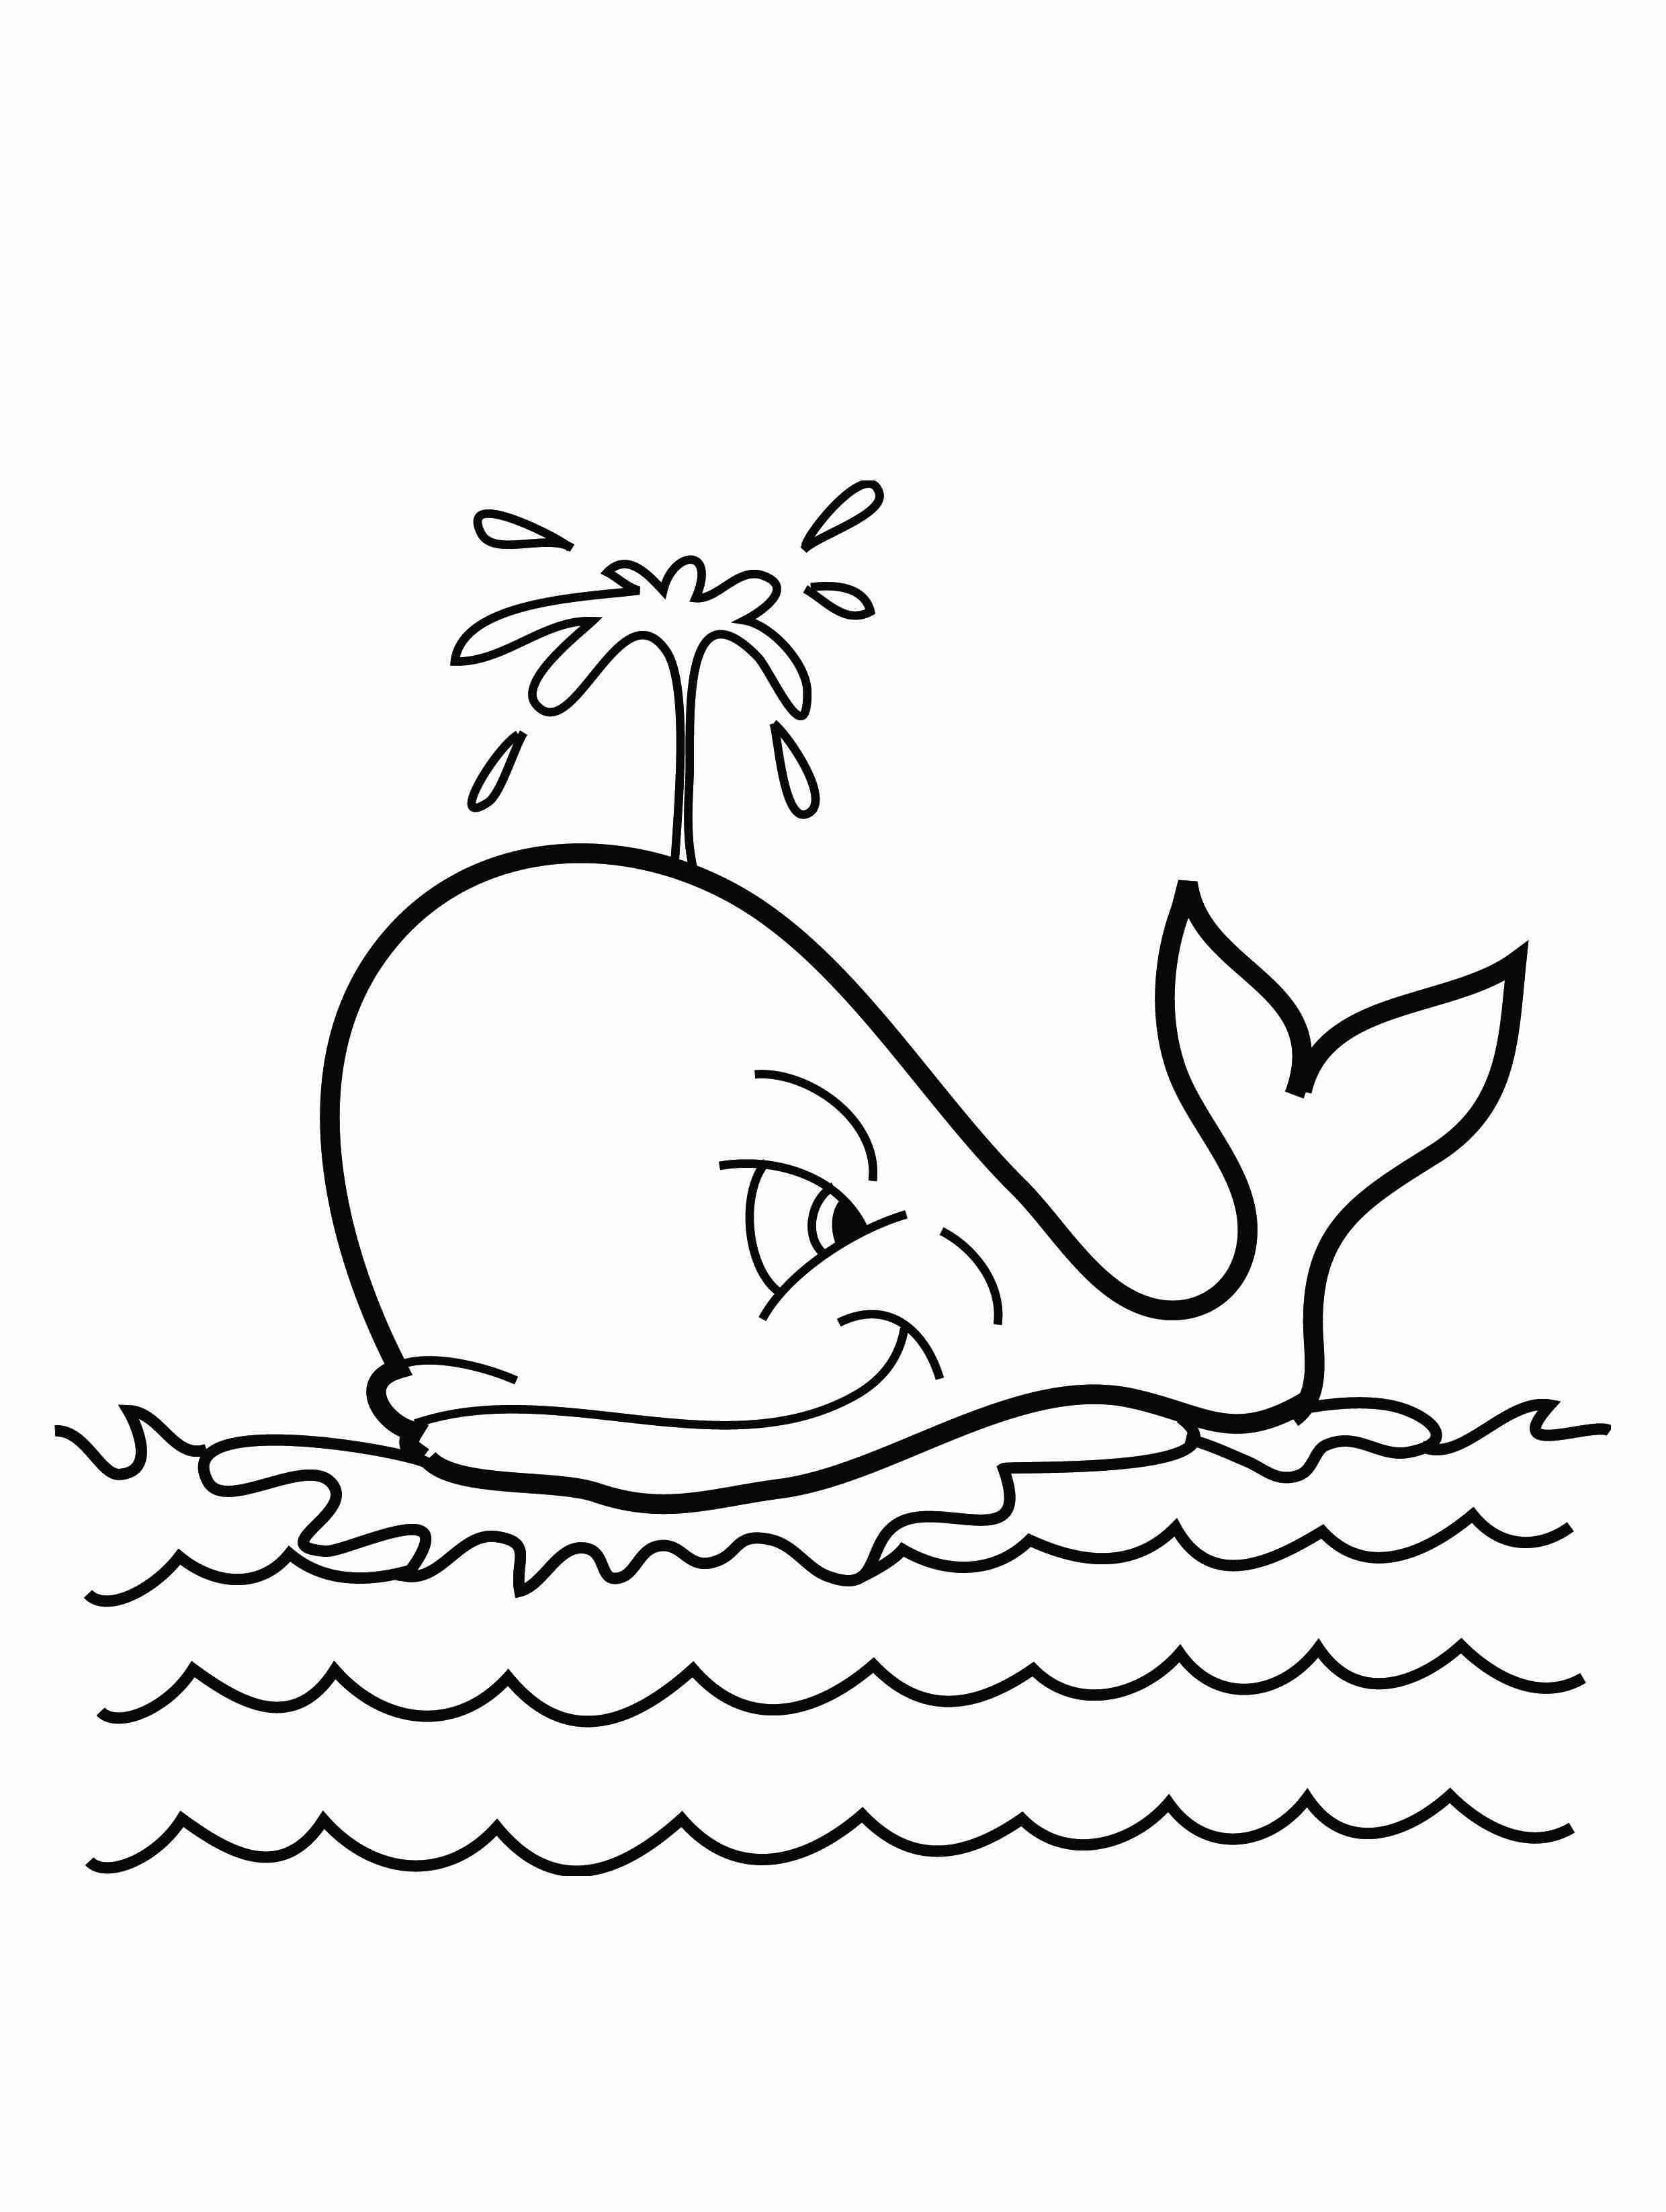 Shamu Coloring Pages Killer Whale Coloring Pages For Kids At Getdrawings Free For